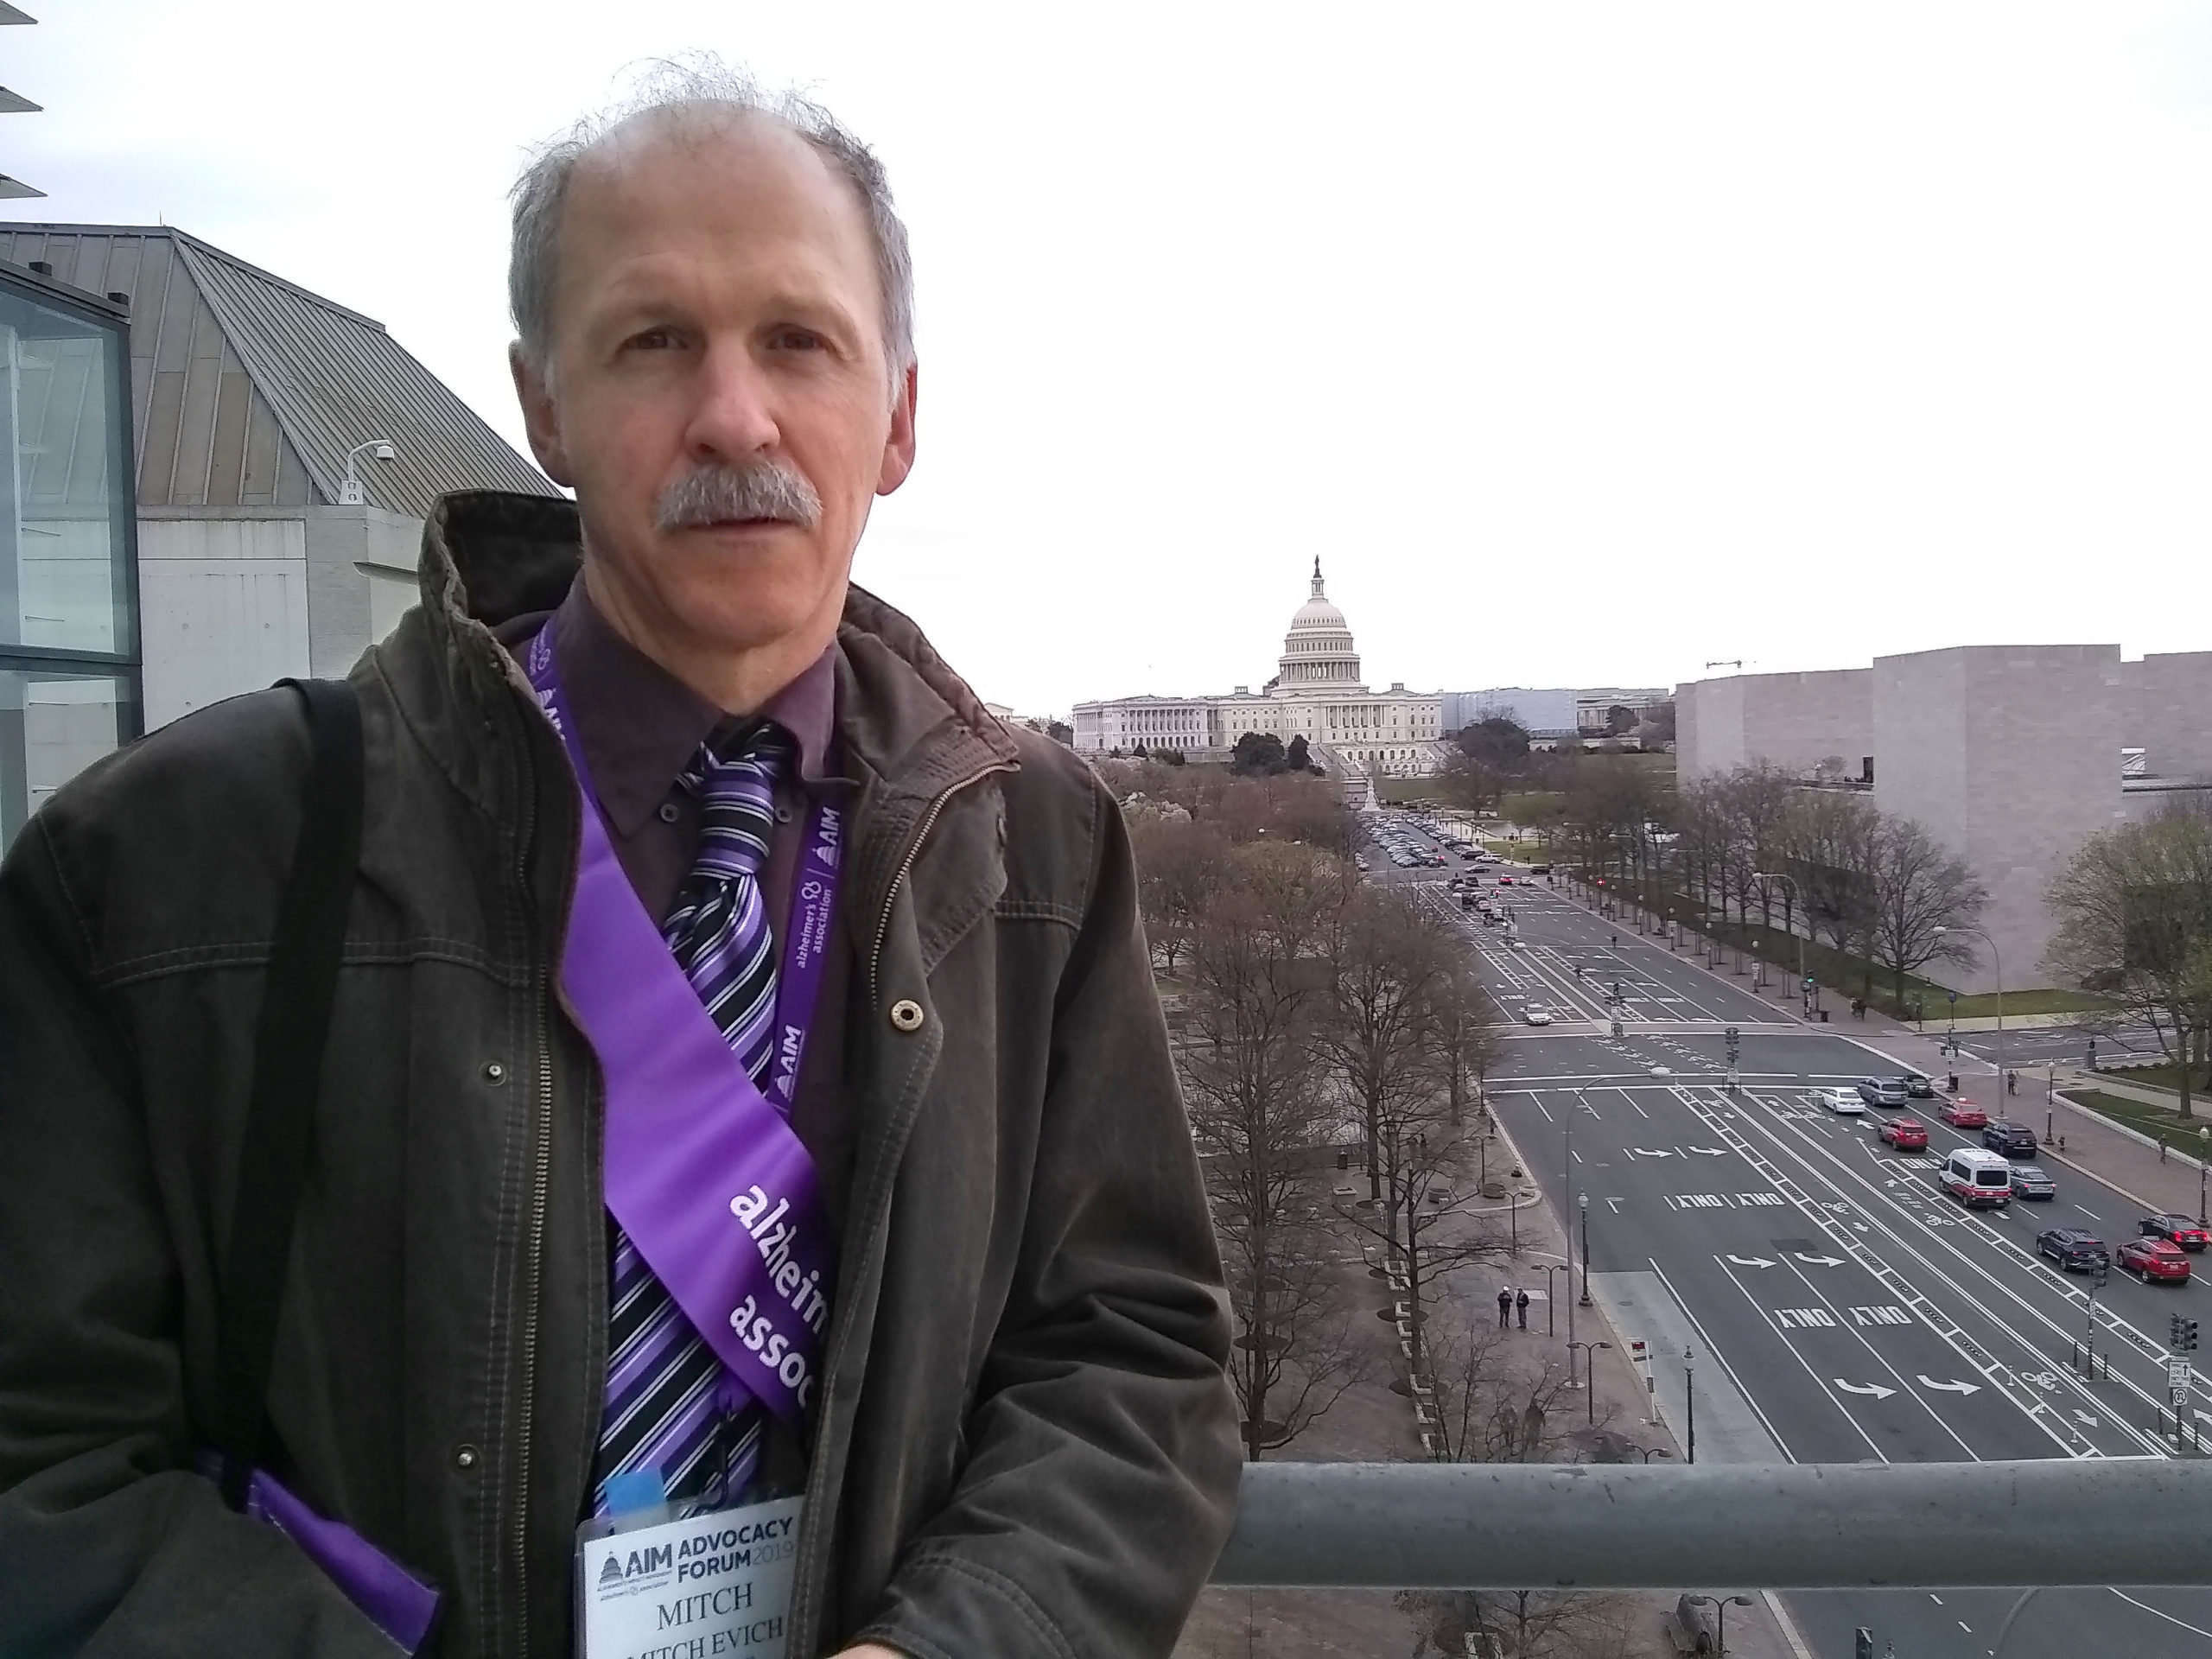 Mitch Evich, photographed at the Newseum overlooking the US capital 